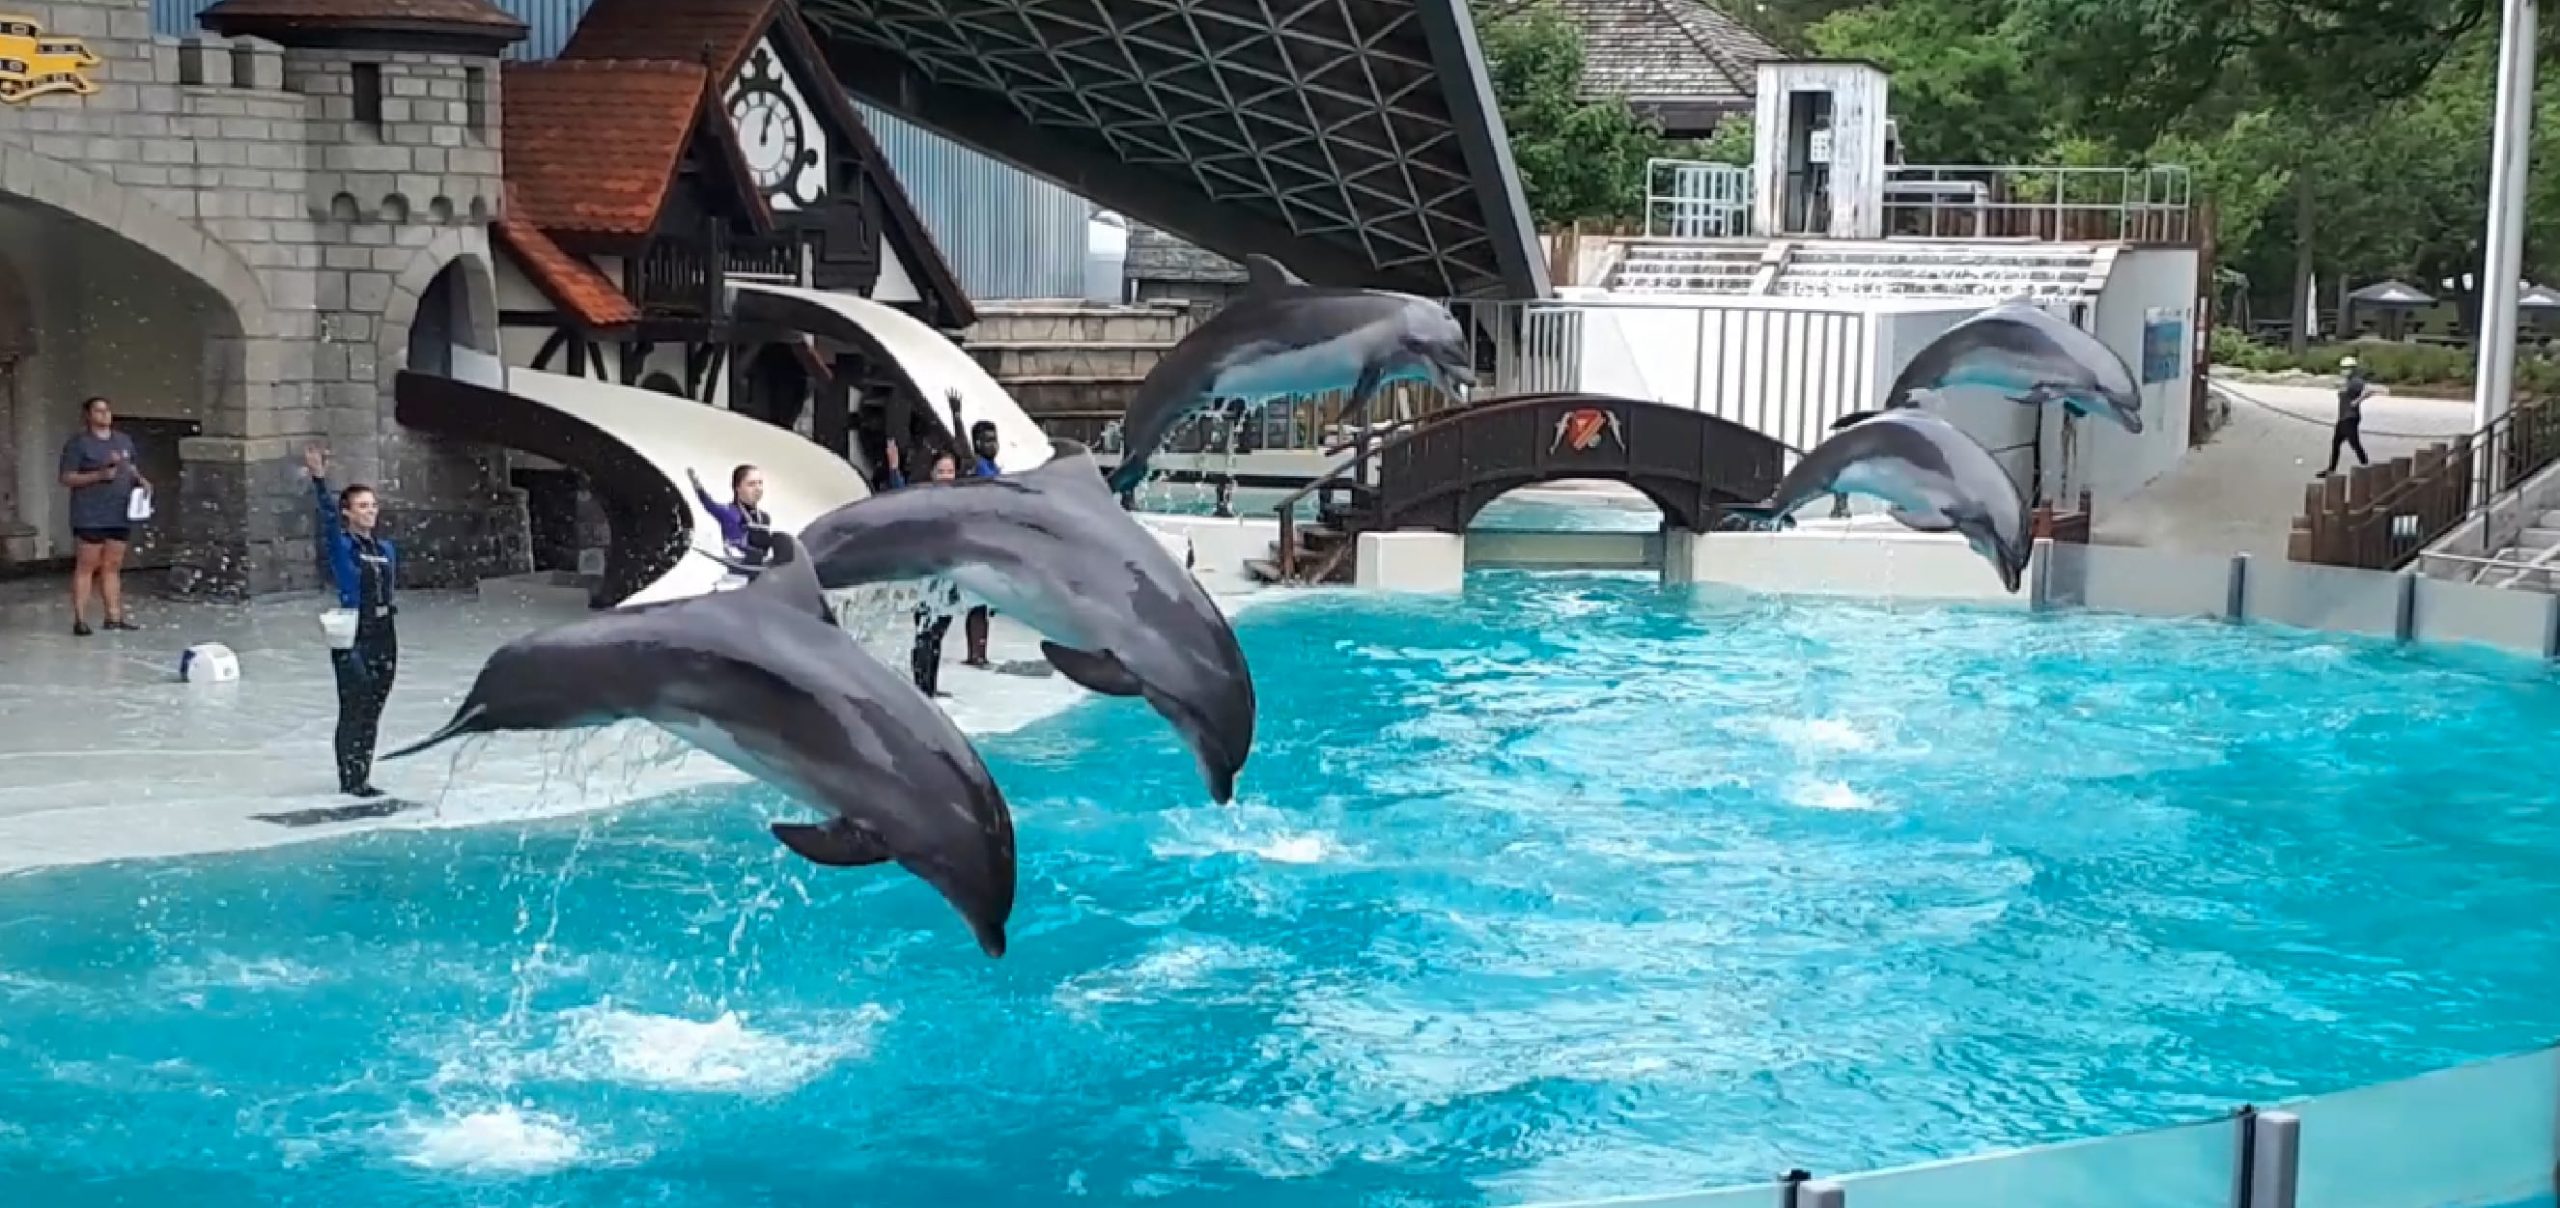 Whales & Dolphins Are STILL Suffering at Marineland